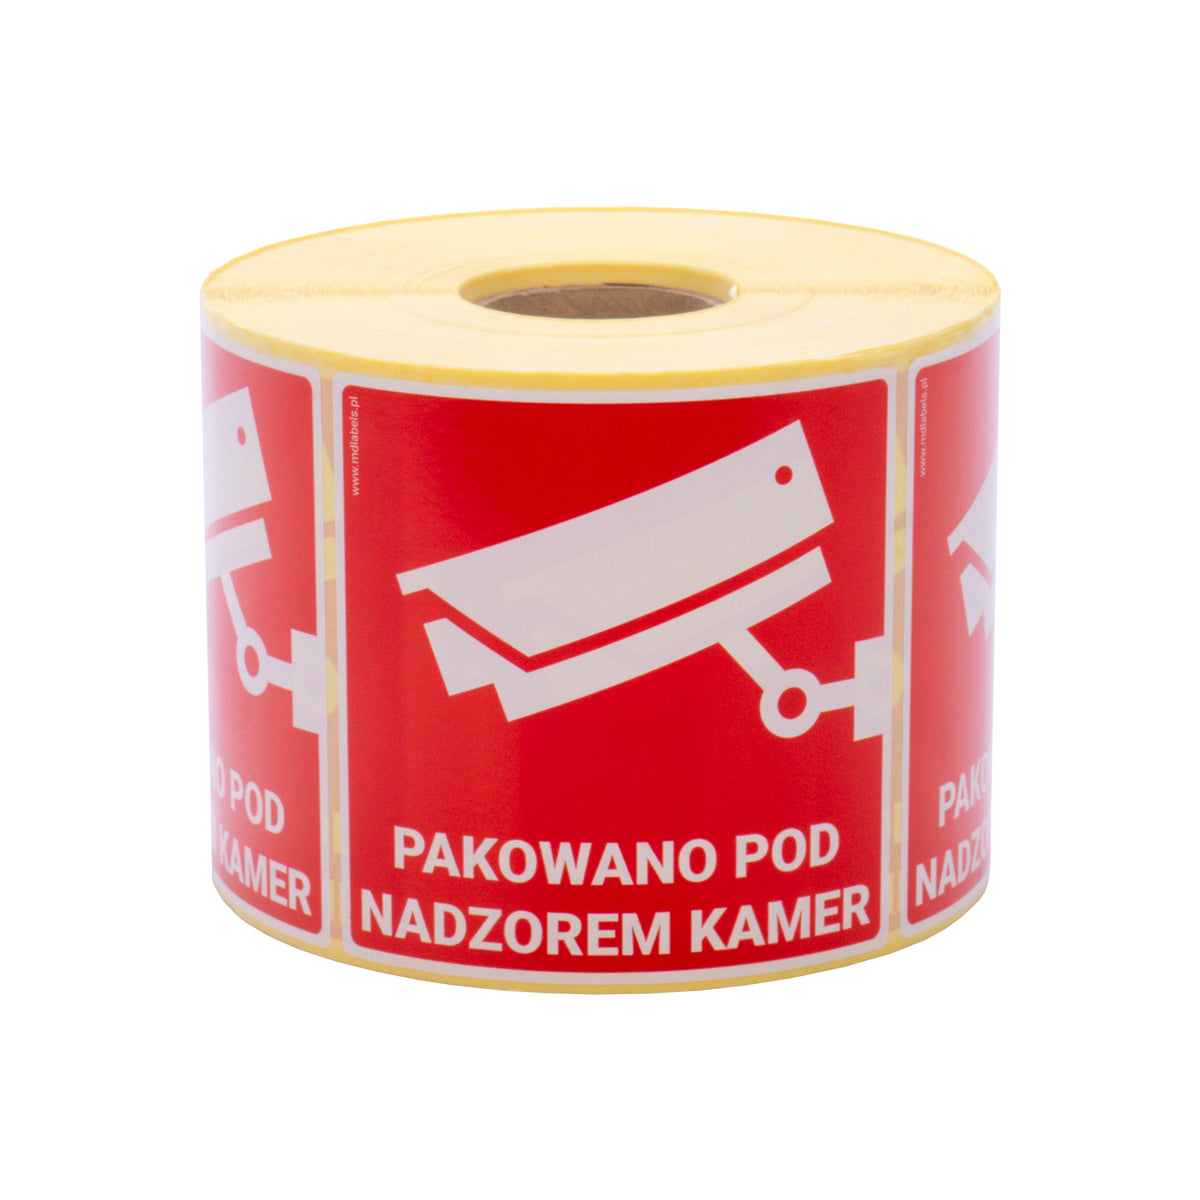 Self-adhesive warning labels - Packaged under camera surveillance! - 98x98mm 1000 per roll